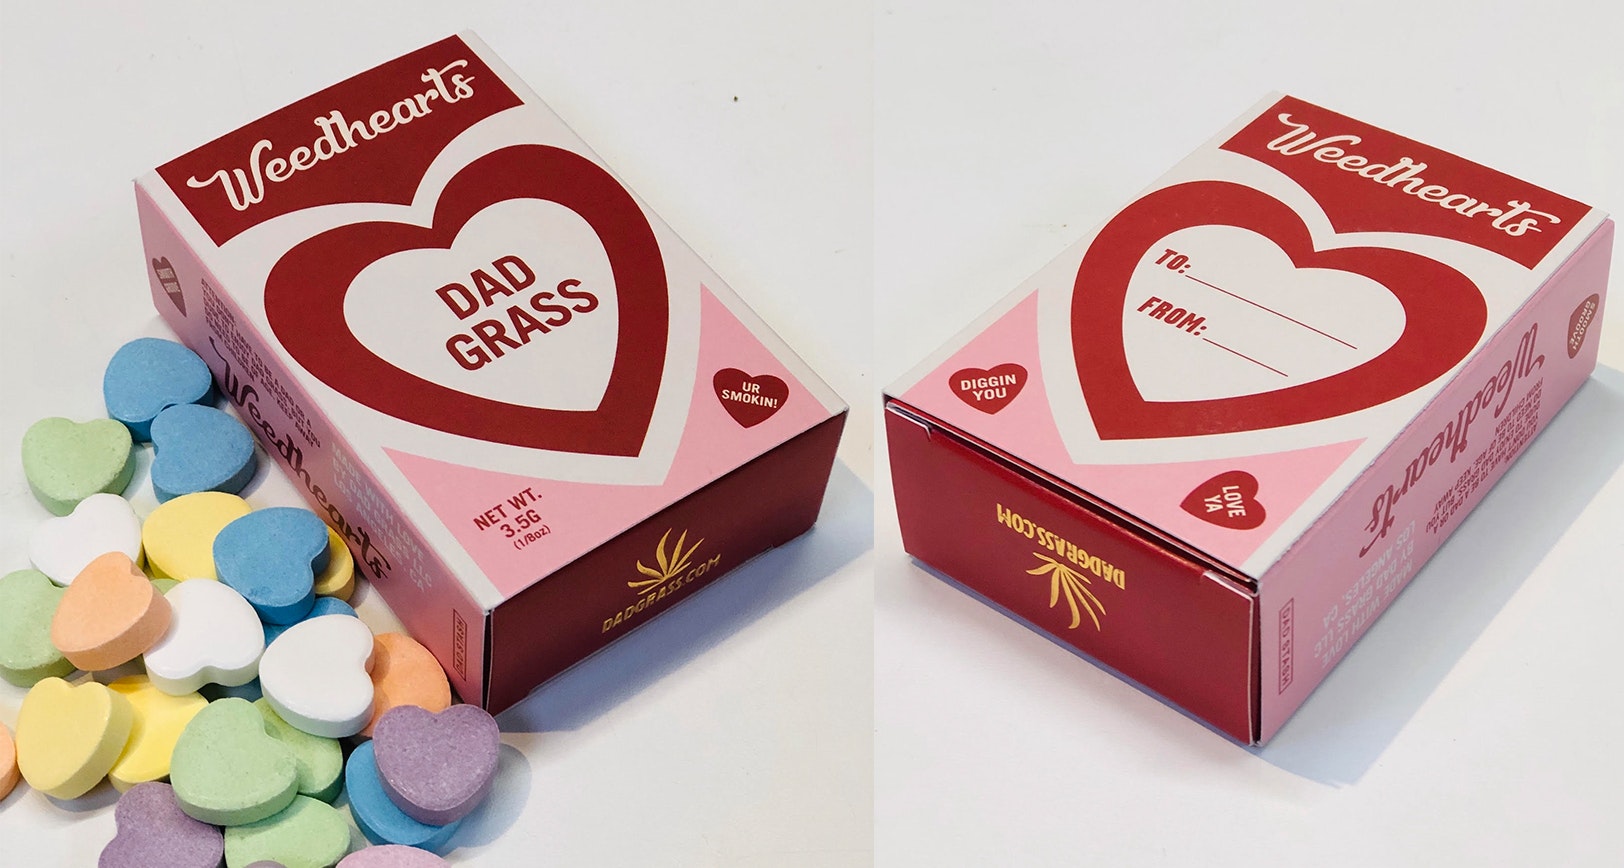 Dad Grass boxes are made to look like the valentine's day sweethearts candy.